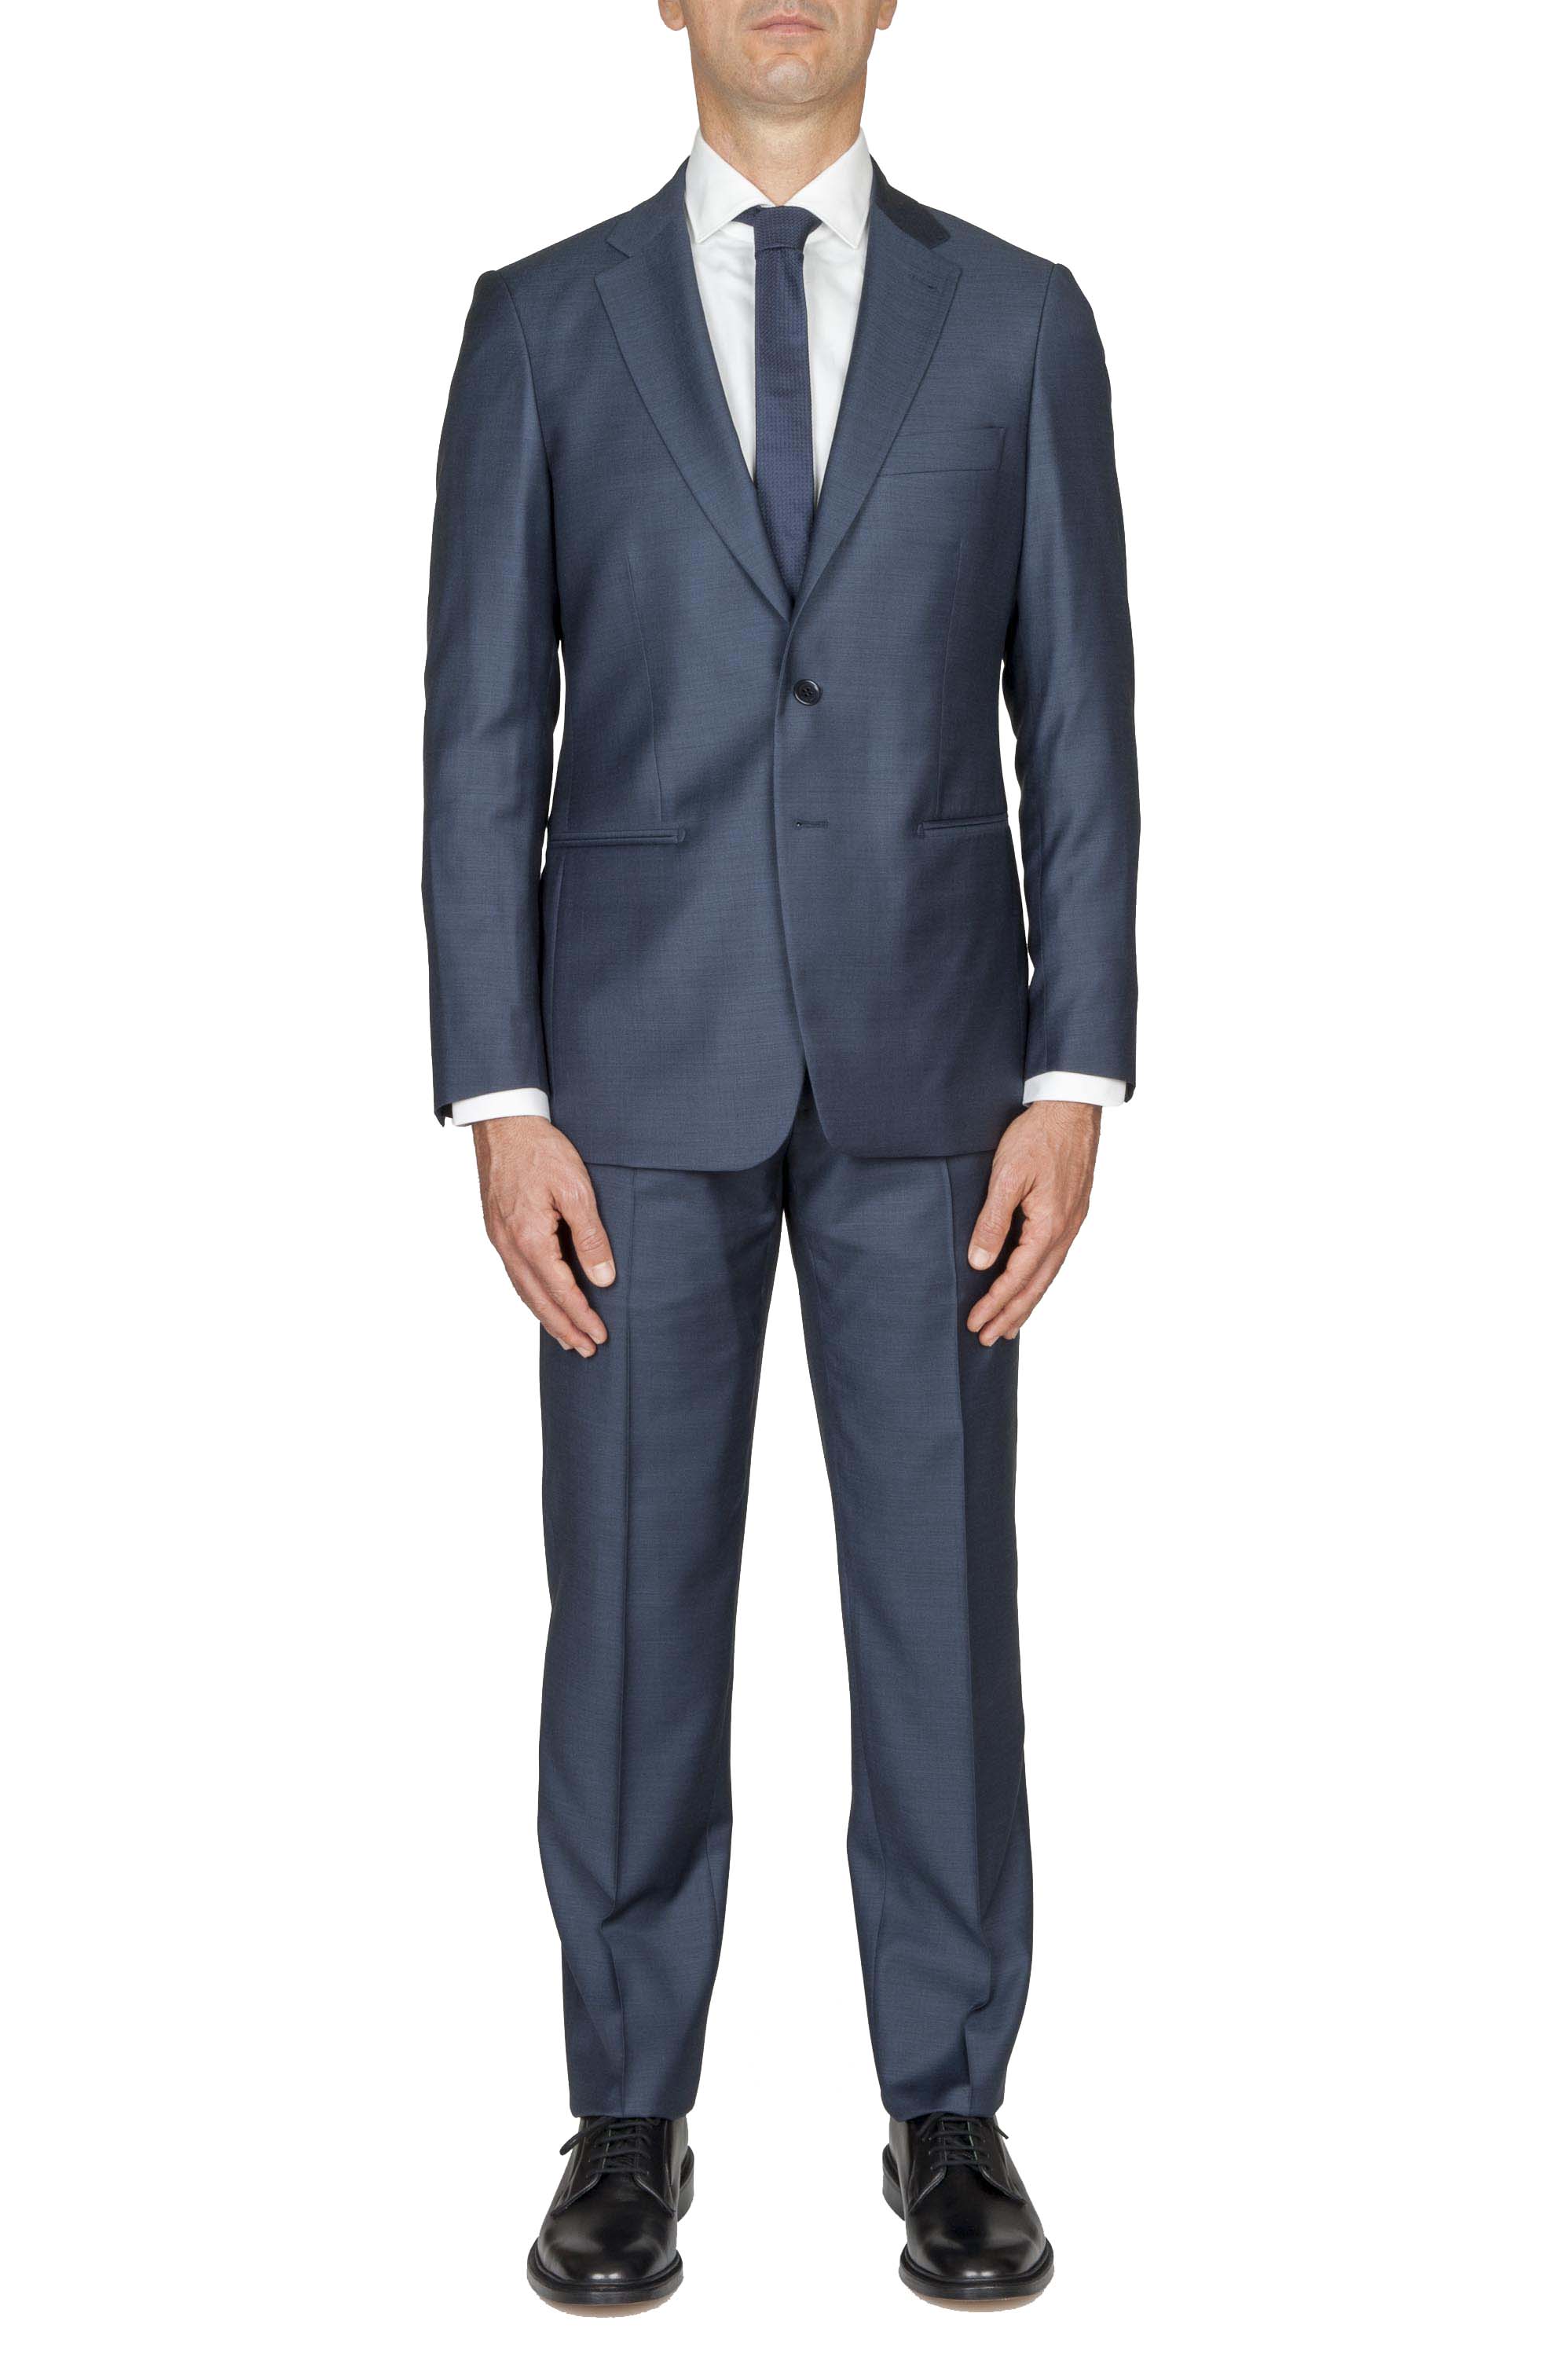 SBU Collection Summer 2020 Suits